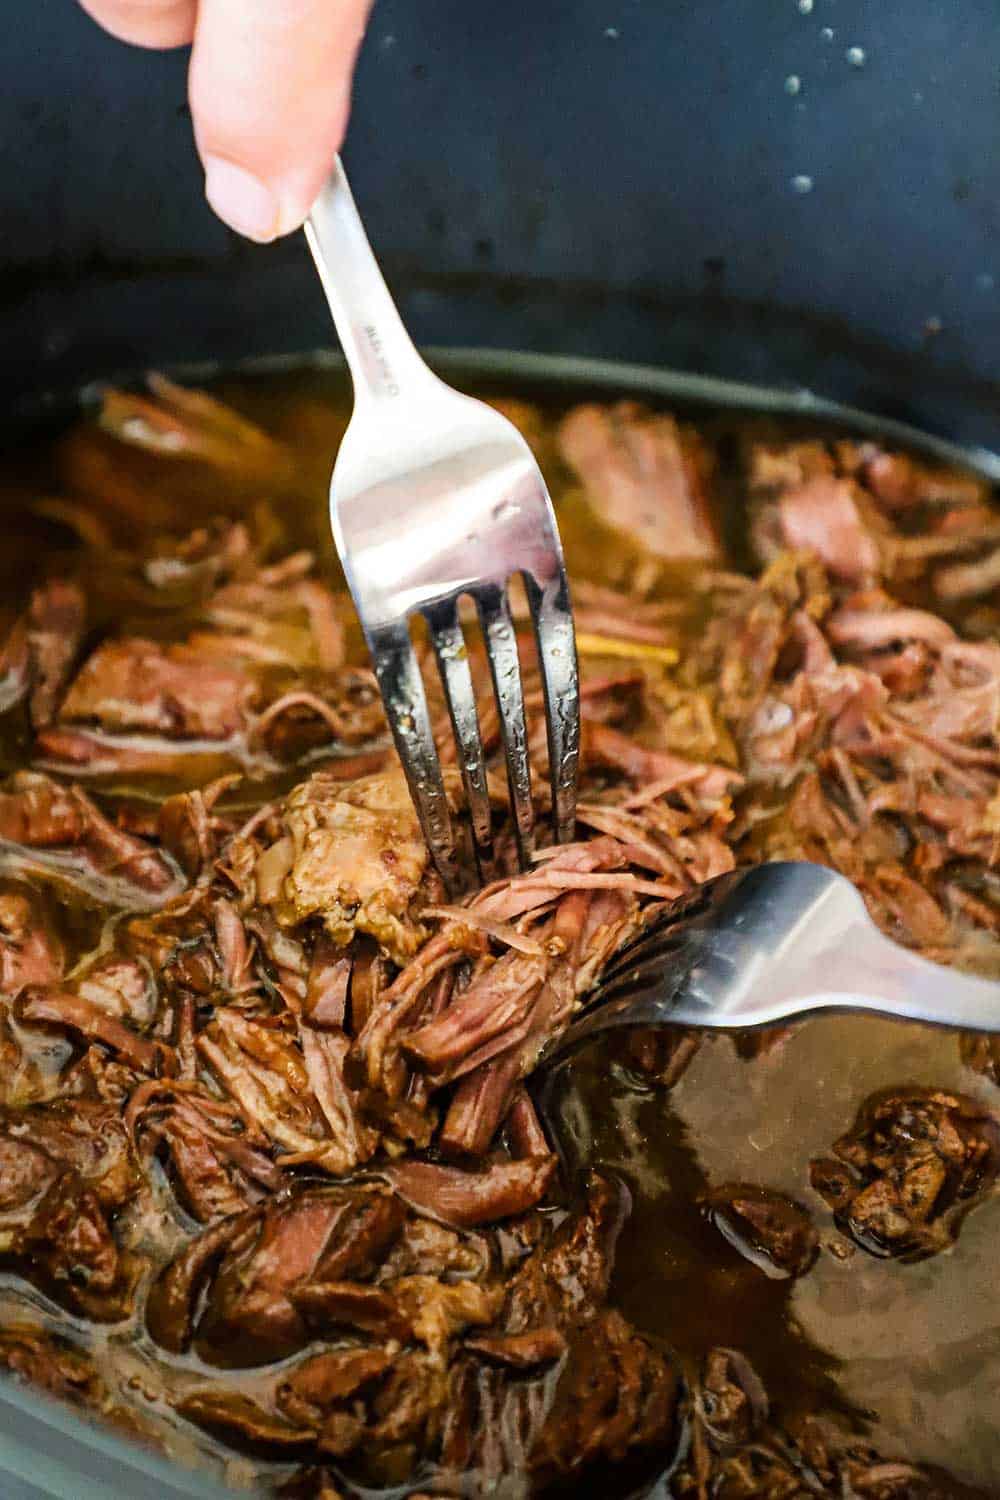 A person using two forks to shred a pot roast that has cooked and is extremely tender.